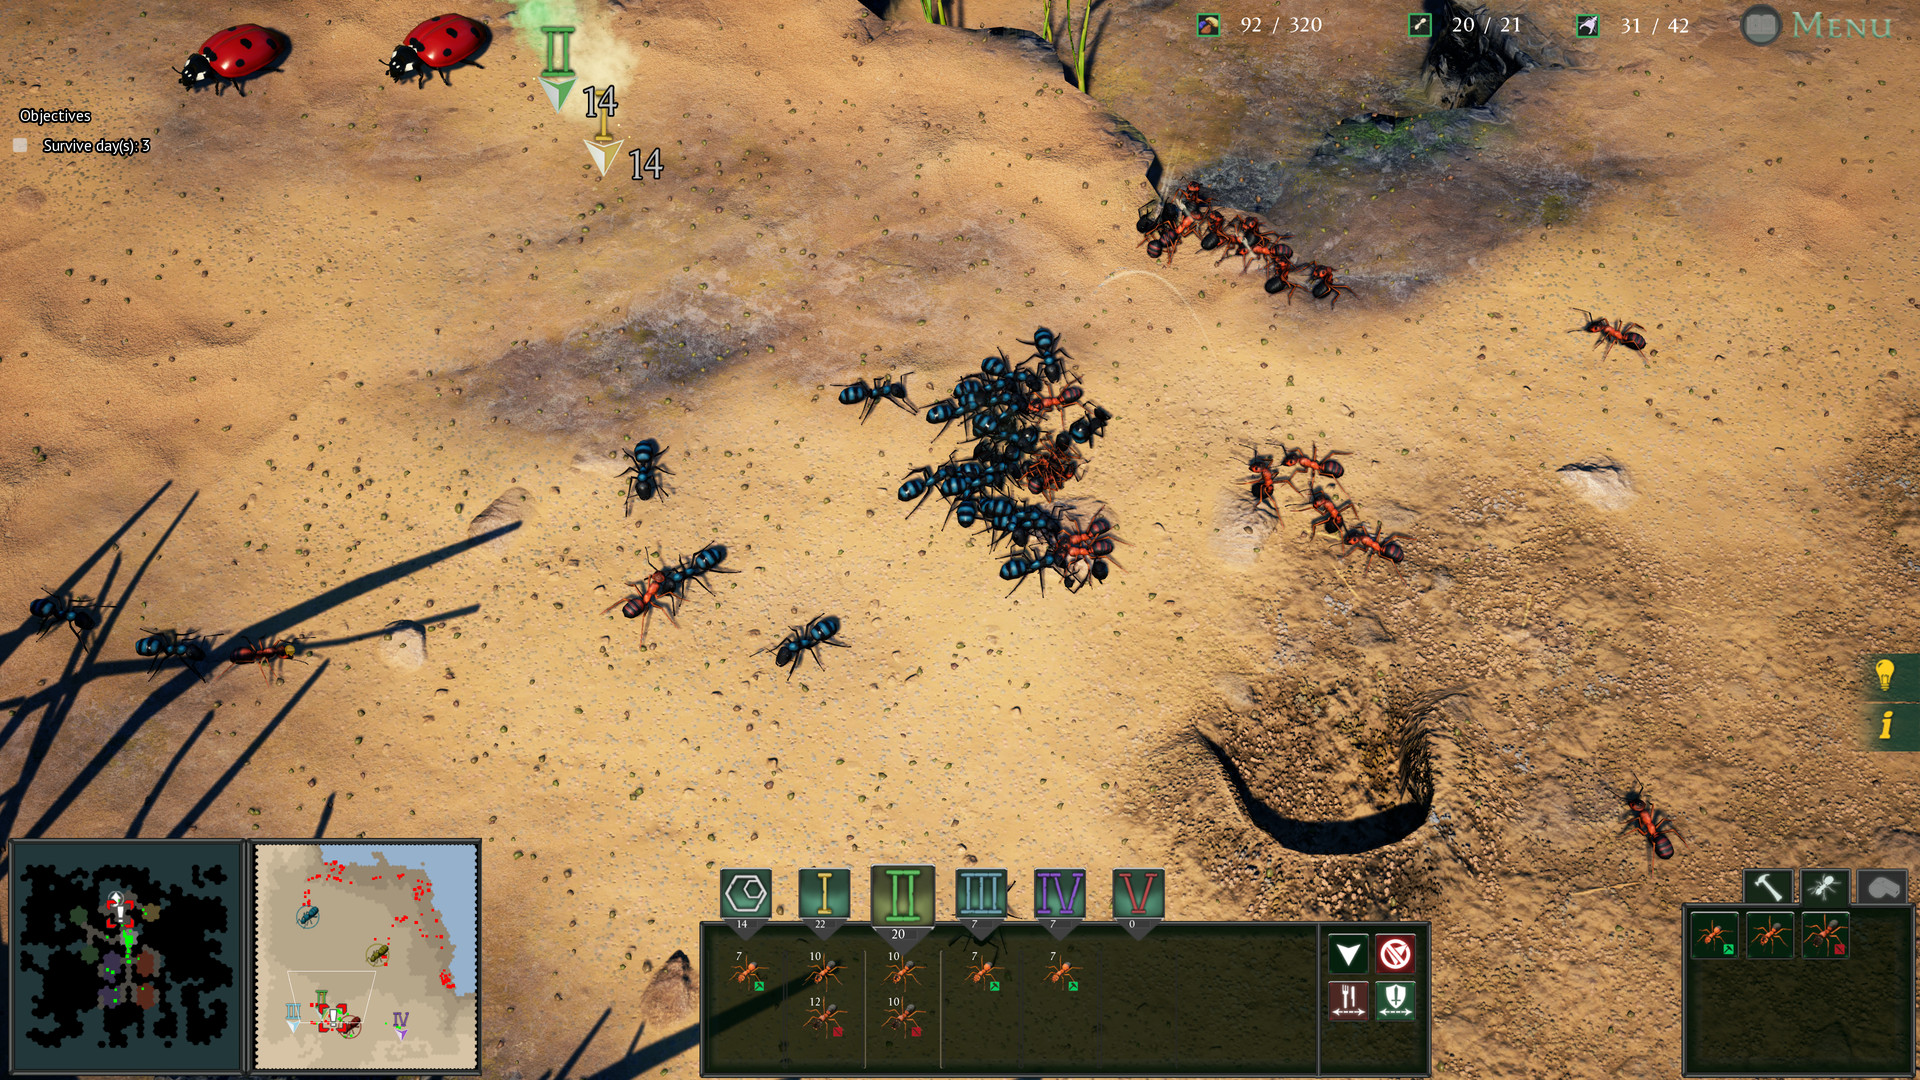 Empires of The Undergrowth Screenshot 3